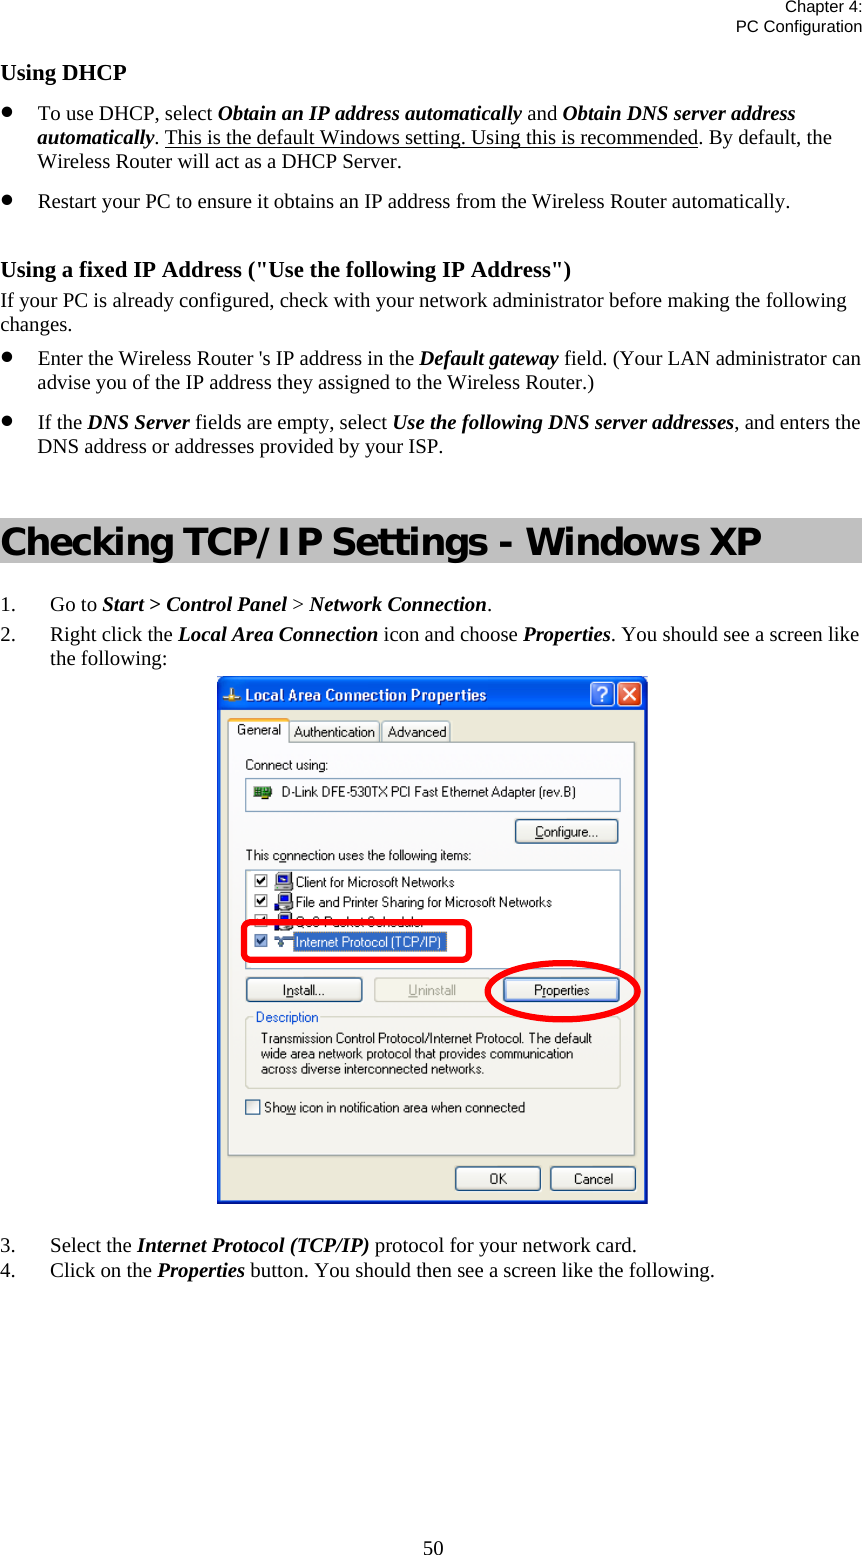   Chapter 4:  PC Configuration  50Using DHCP • To use DHCP, select Obtain an IP address automatically and Obtain DNS server address automatically. This is the default Windows setting. Using this is recommended. By default, the Wireless Router will act as a DHCP Server. • Restart your PC to ensure it obtains an IP address from the Wireless Router automatically.  Using a fixed IP Address (&quot;Use the following IP Address&quot;) If your PC is already configured, check with your network administrator before making the following changes. • Enter the Wireless Router &apos;s IP address in the Default gateway field. (Your LAN administrator can advise you of the IP address they assigned to the Wireless Router.) • If the DNS Server fields are empty, select Use the following DNS server addresses, and enters the DNS address or addresses provided by your ISP.  Checking TCP/IP Settings - Windows XP 1. Go to Start &gt; Control Panel &gt; Network Connection. 2. Right click the Local Area Connection icon and choose Properties. You should see a screen like the following:  3. Select the Internet Protocol (TCP/IP) protocol for your network card. 4. Click on the Properties button. You should then see a screen like the following. 